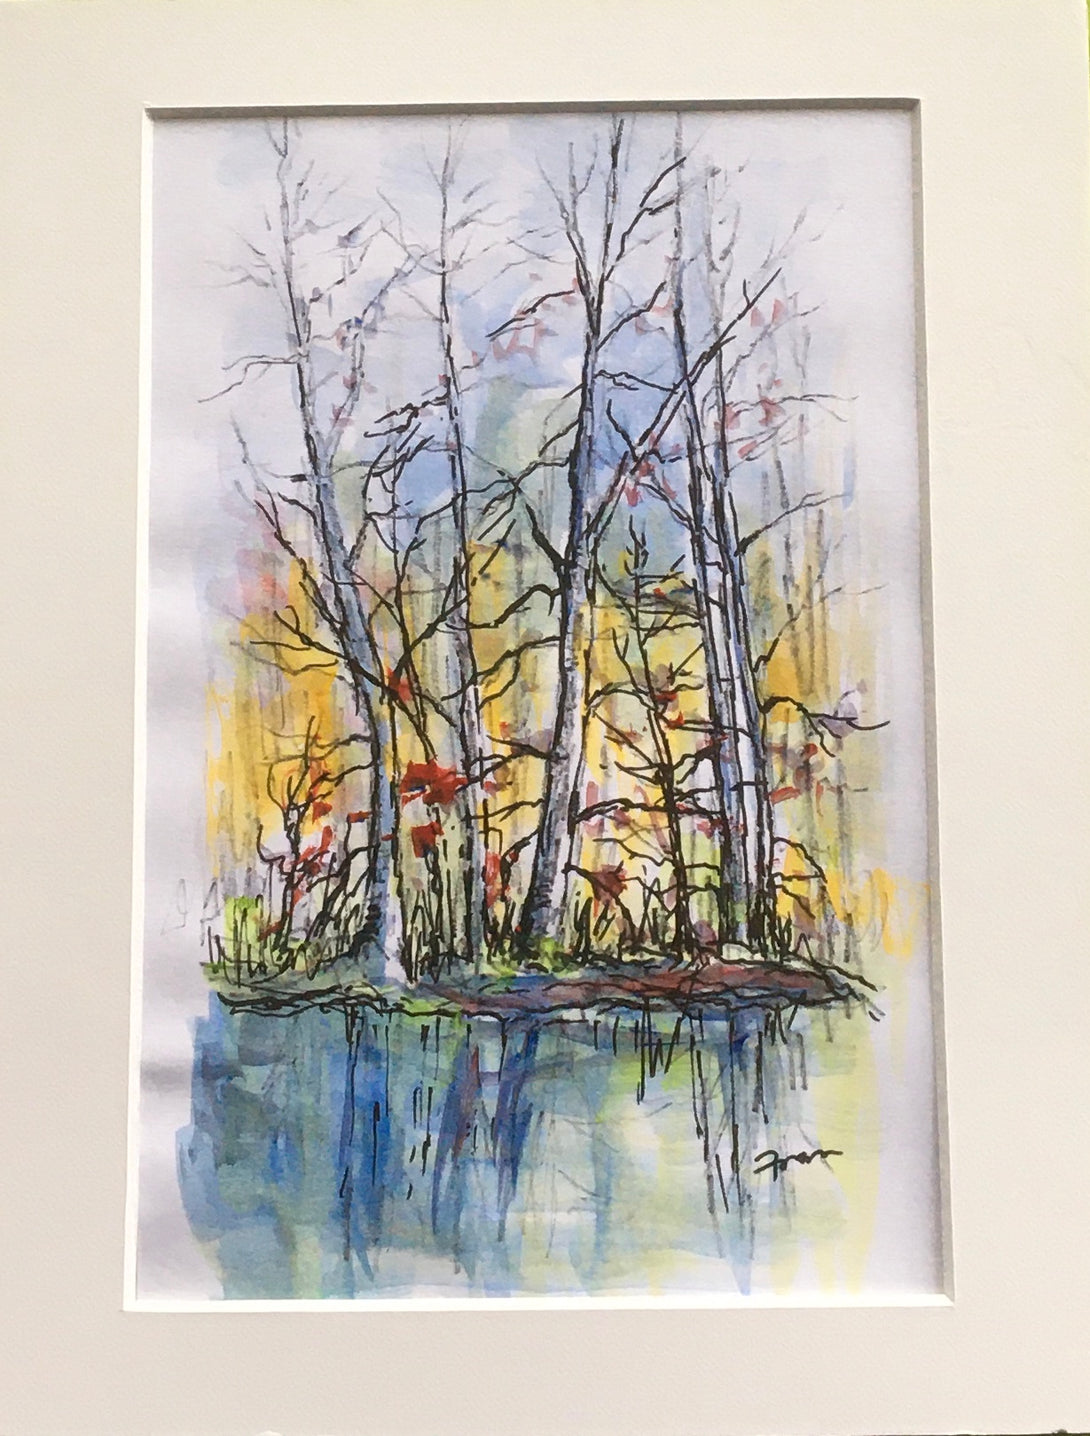 Fran Renwick - Watercolour painting -Trees & Water, matted, unframed - Fran Renwick - McMillan Arts Centre Gallery, Gift Shop and Box Office - Vancouver Island Art Gallery